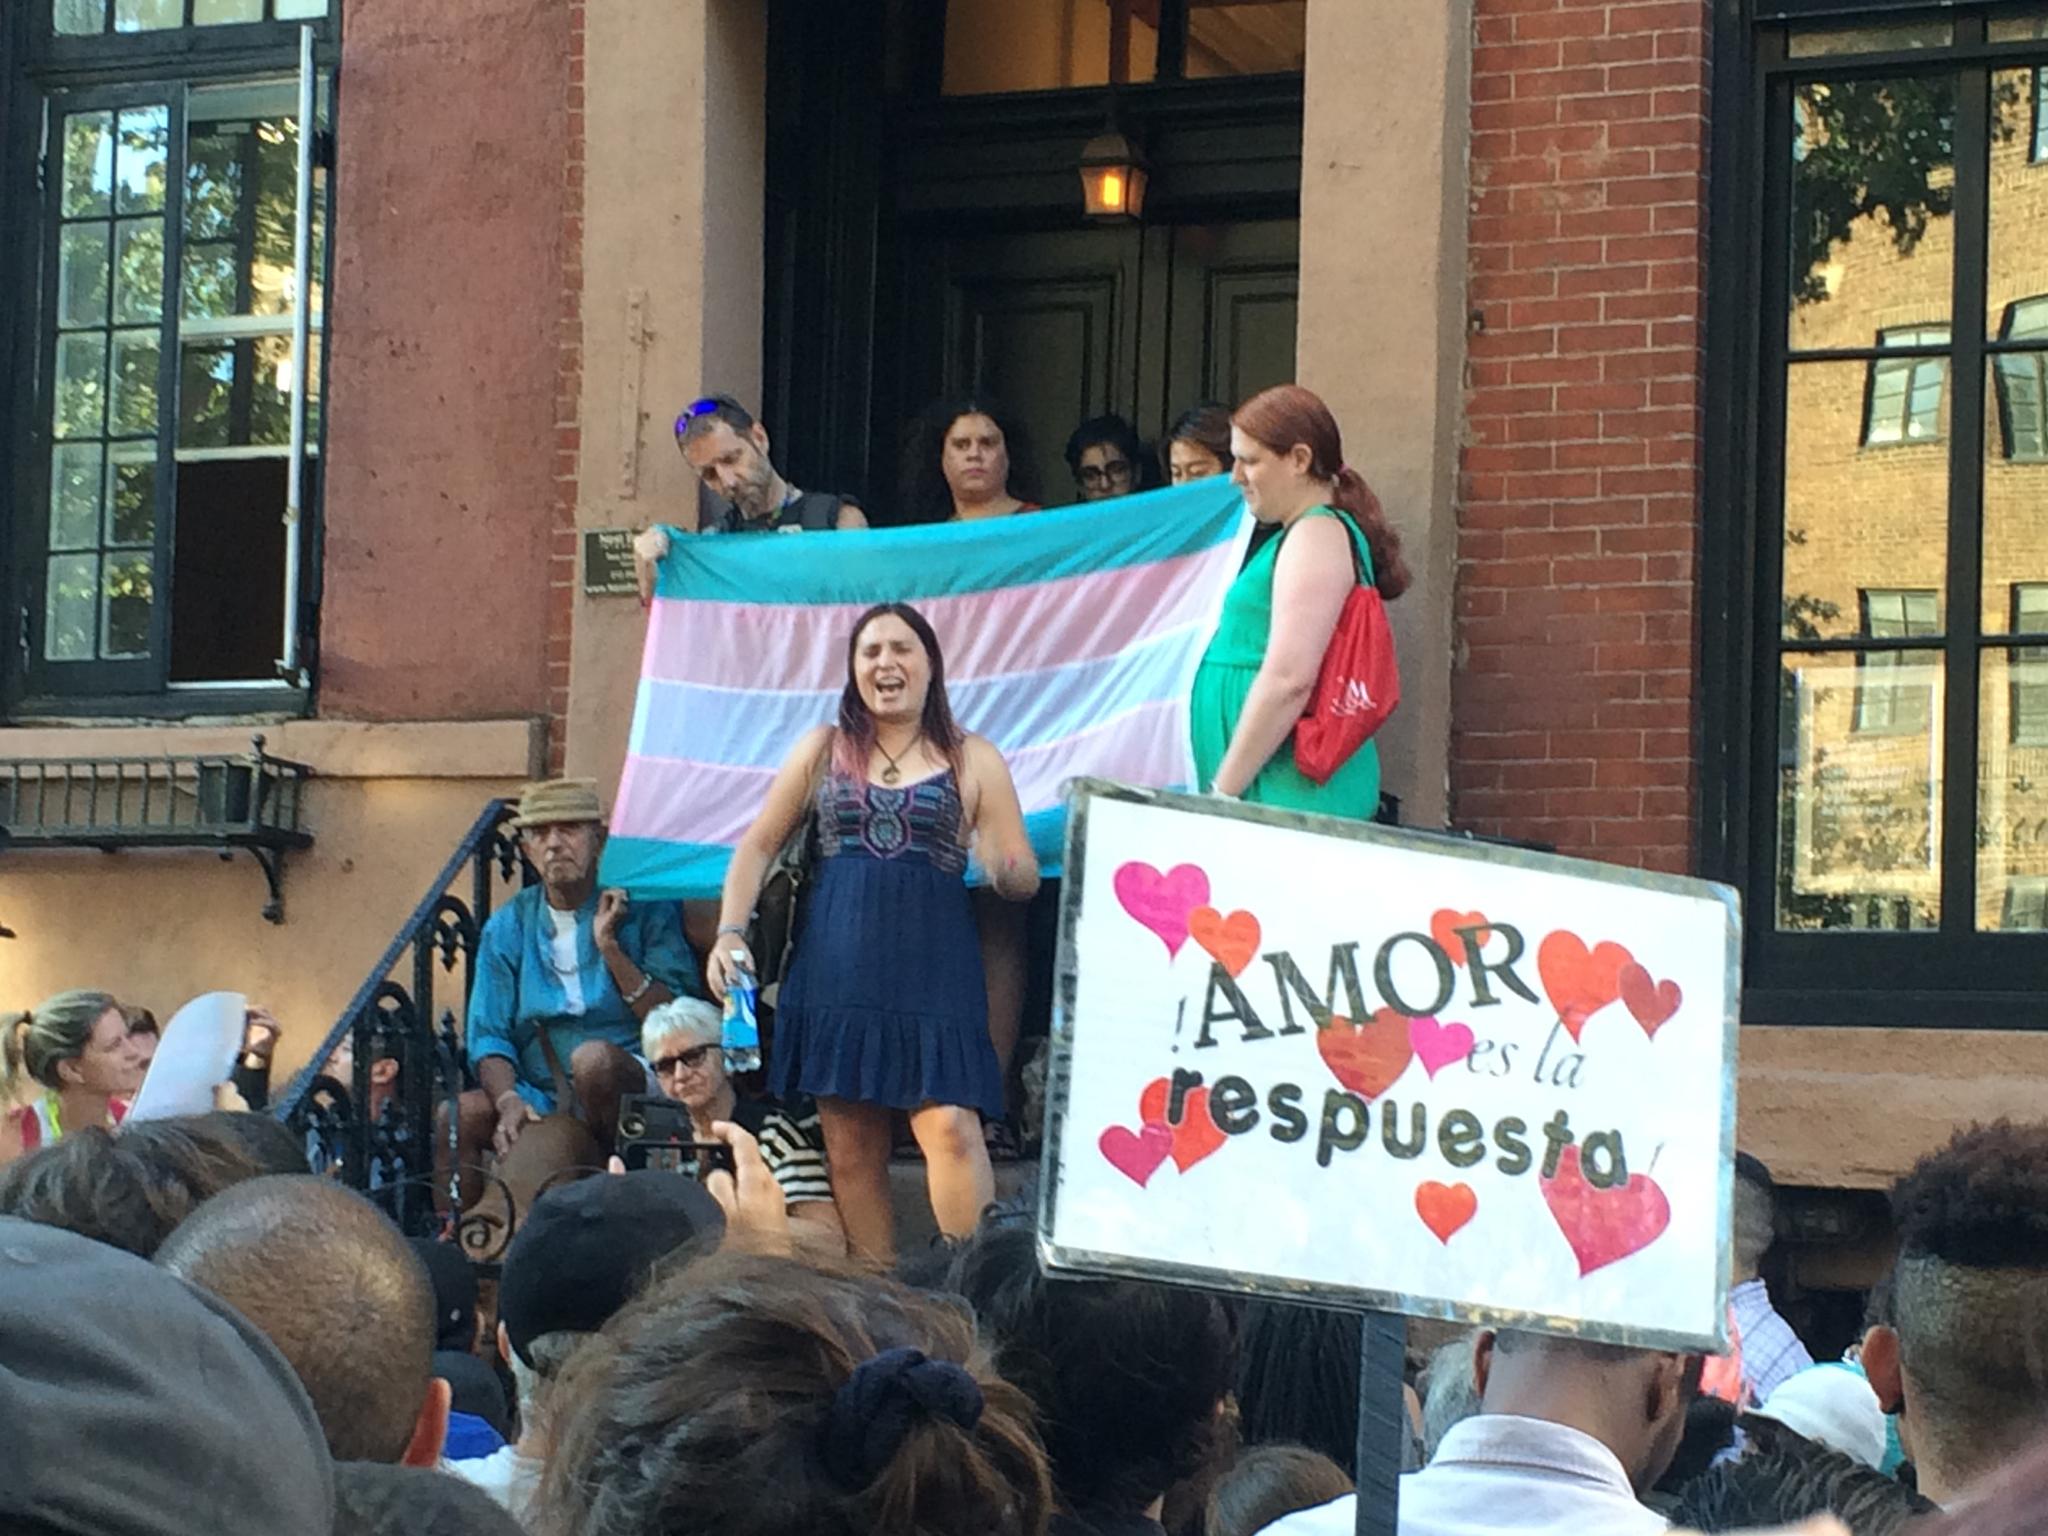 Transgender activists speak at a vigil honouring the victims in Orlando outside of the Stonewall Inn (Feliks Garcia)